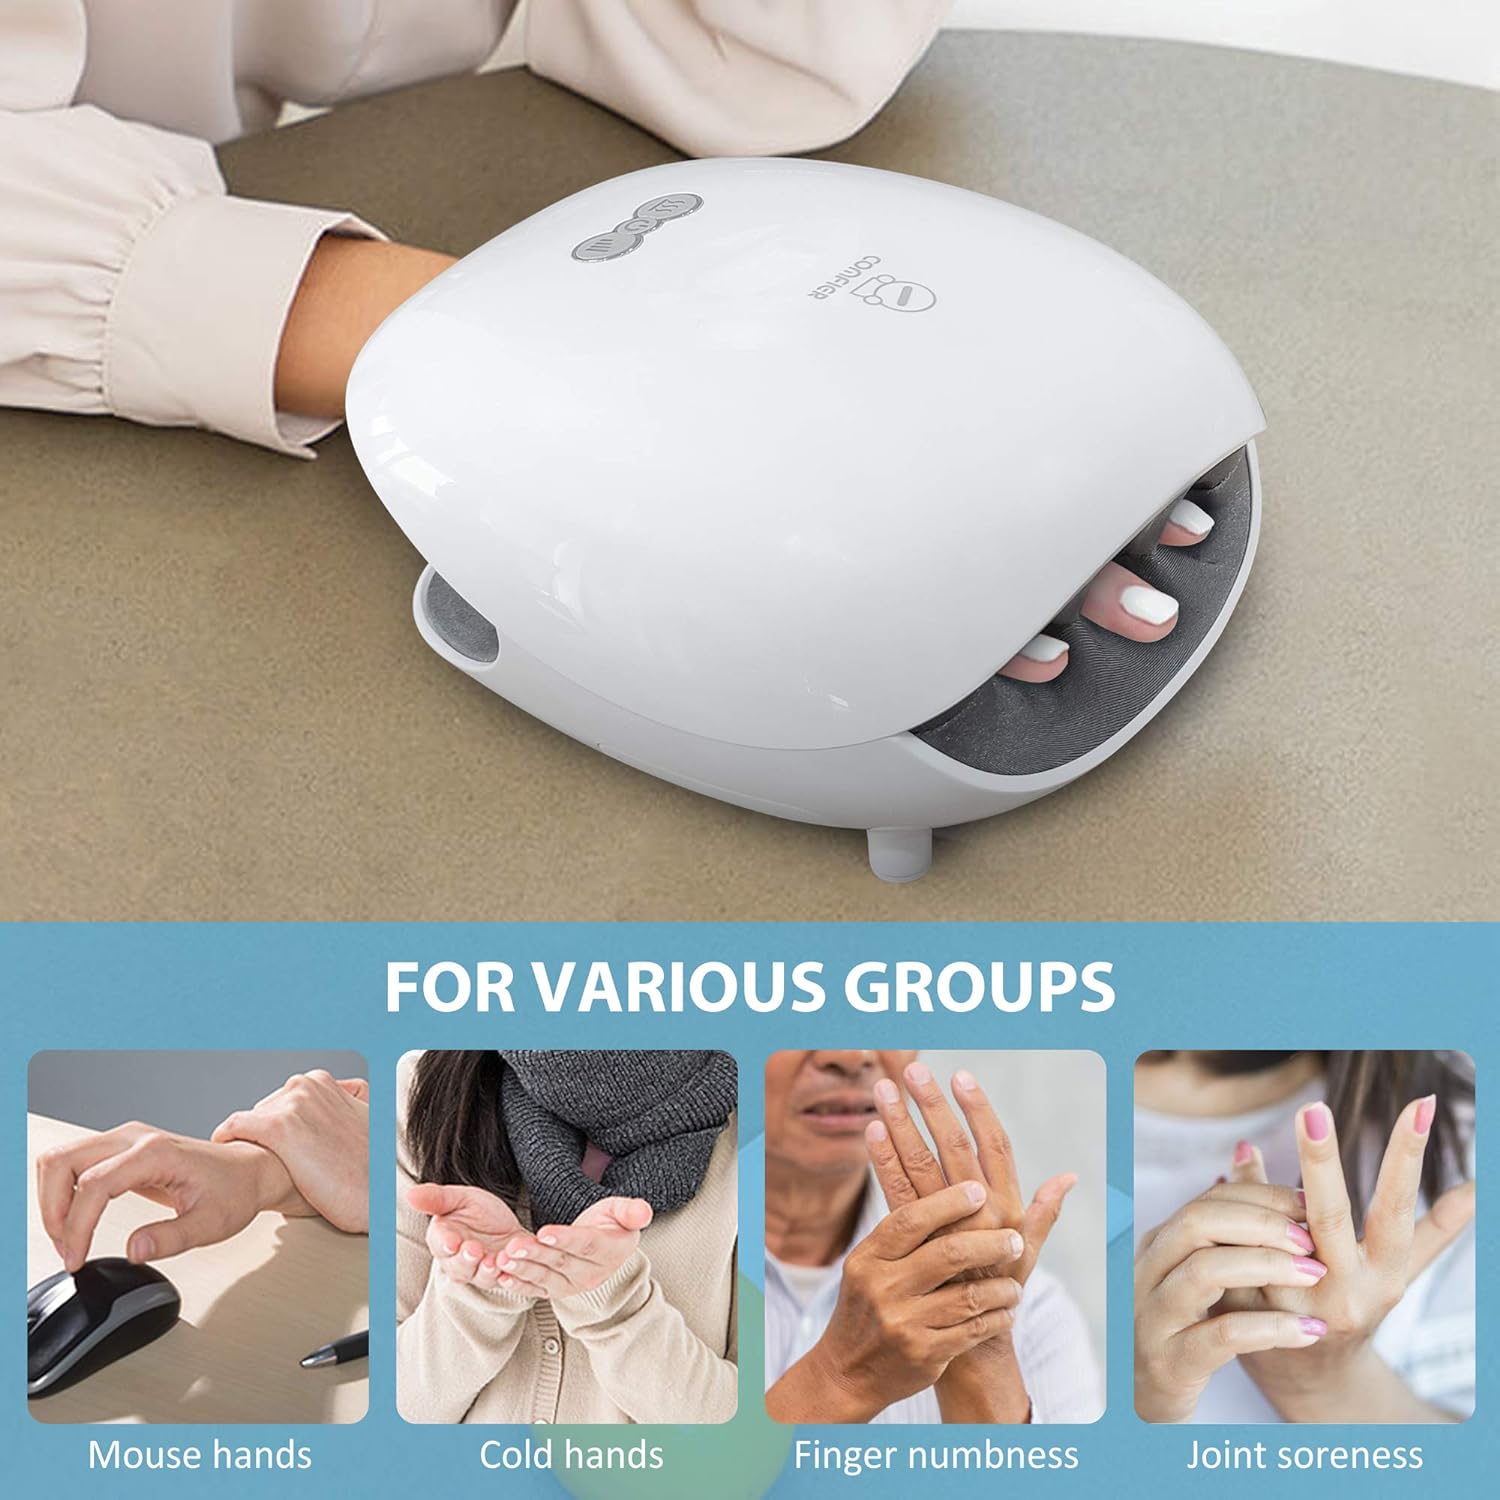 COMFIER Kariwa Wireless Hand Massager With Heat -3 Levels Air Compression